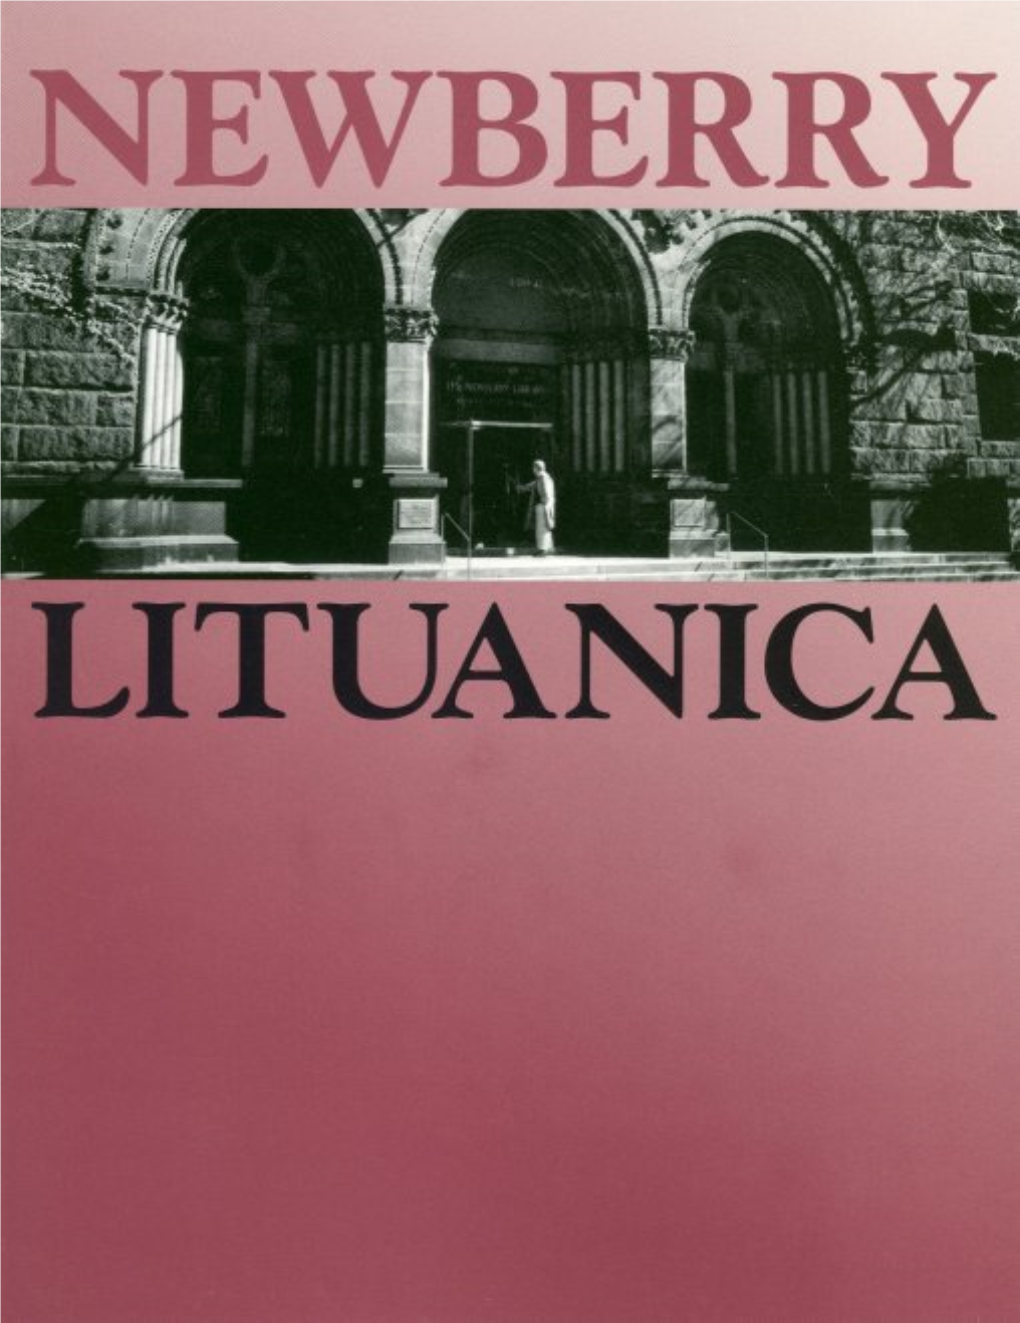 Bibliotekos Lituanistini¨ Ir Pr∆Sistini¨ Knyg¨ Katalogas Iki 1882 Met¨ Books of Lithuanian and Old Prussian Interest at the Newberry Library, Chicago